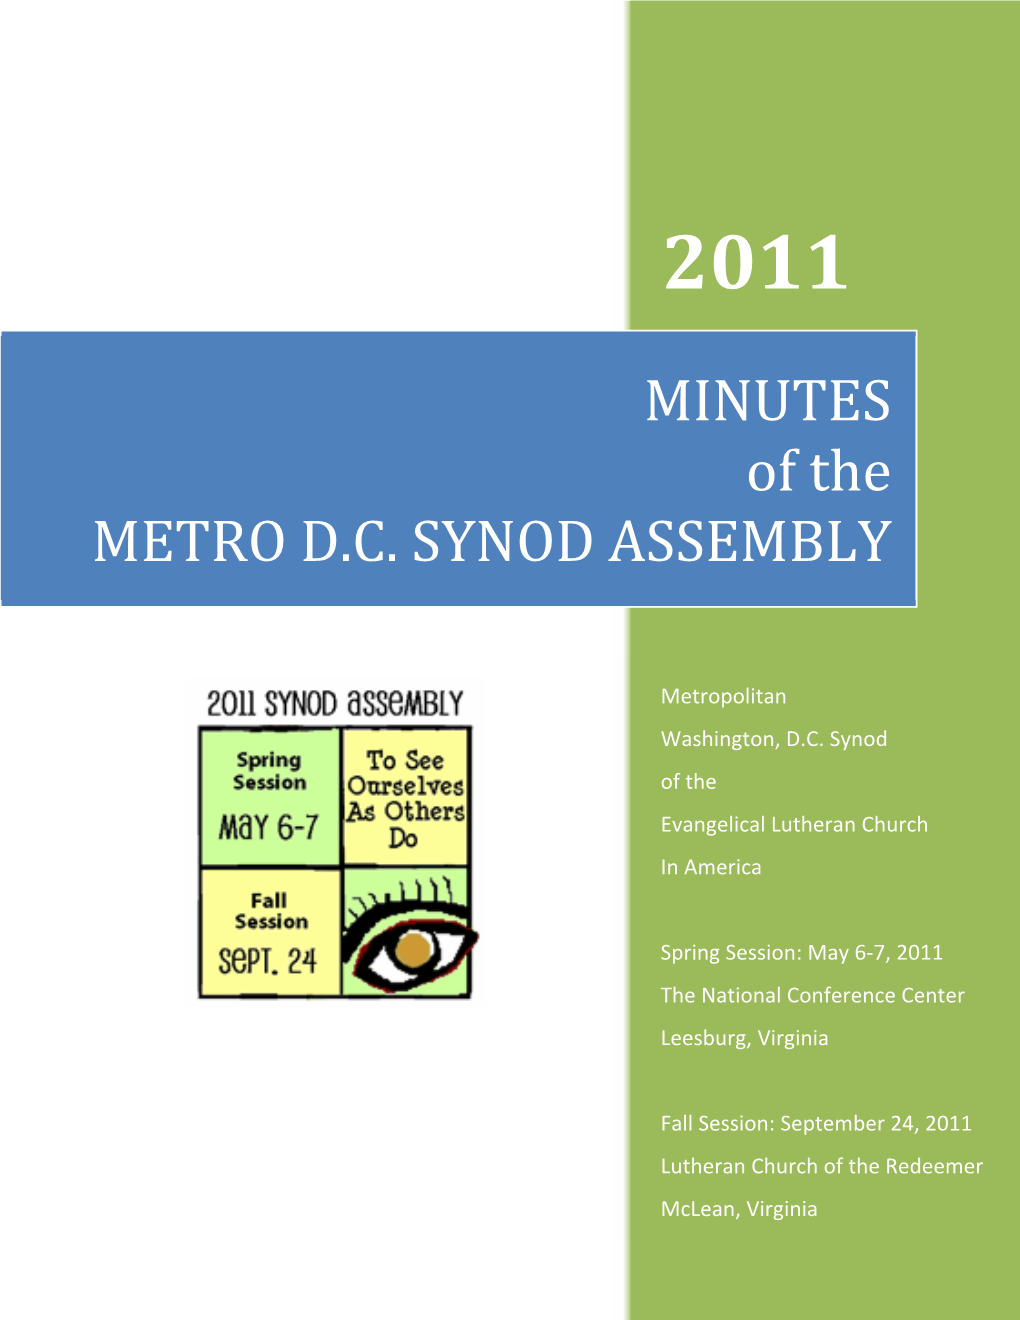 MINUTES of the METRO D.C. SYNOD ASSEMBLY